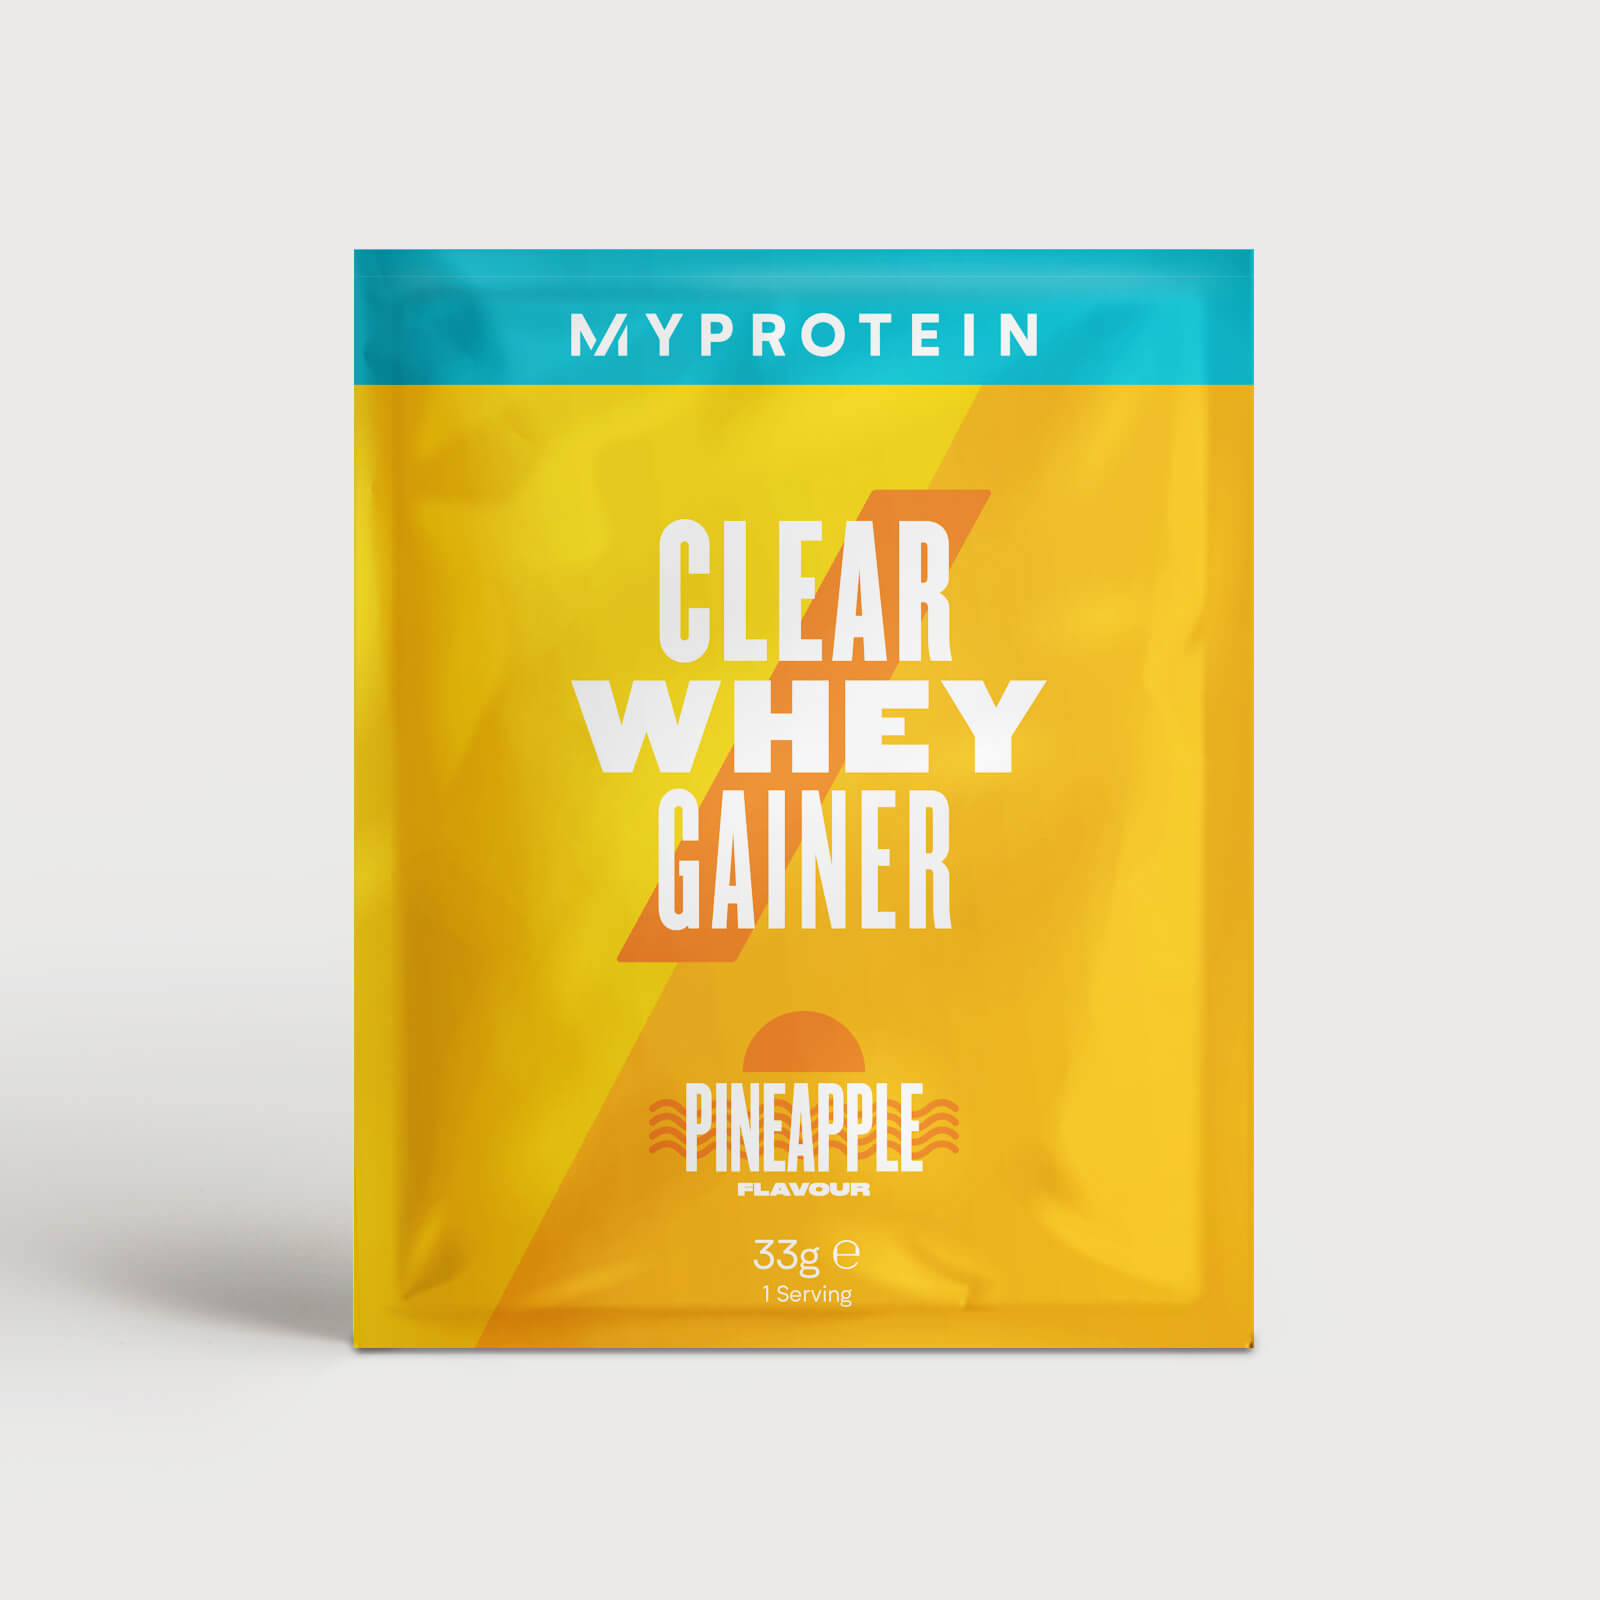 Myprotein Clear Whey Gainer (Sample) - 1servings - Pineapple